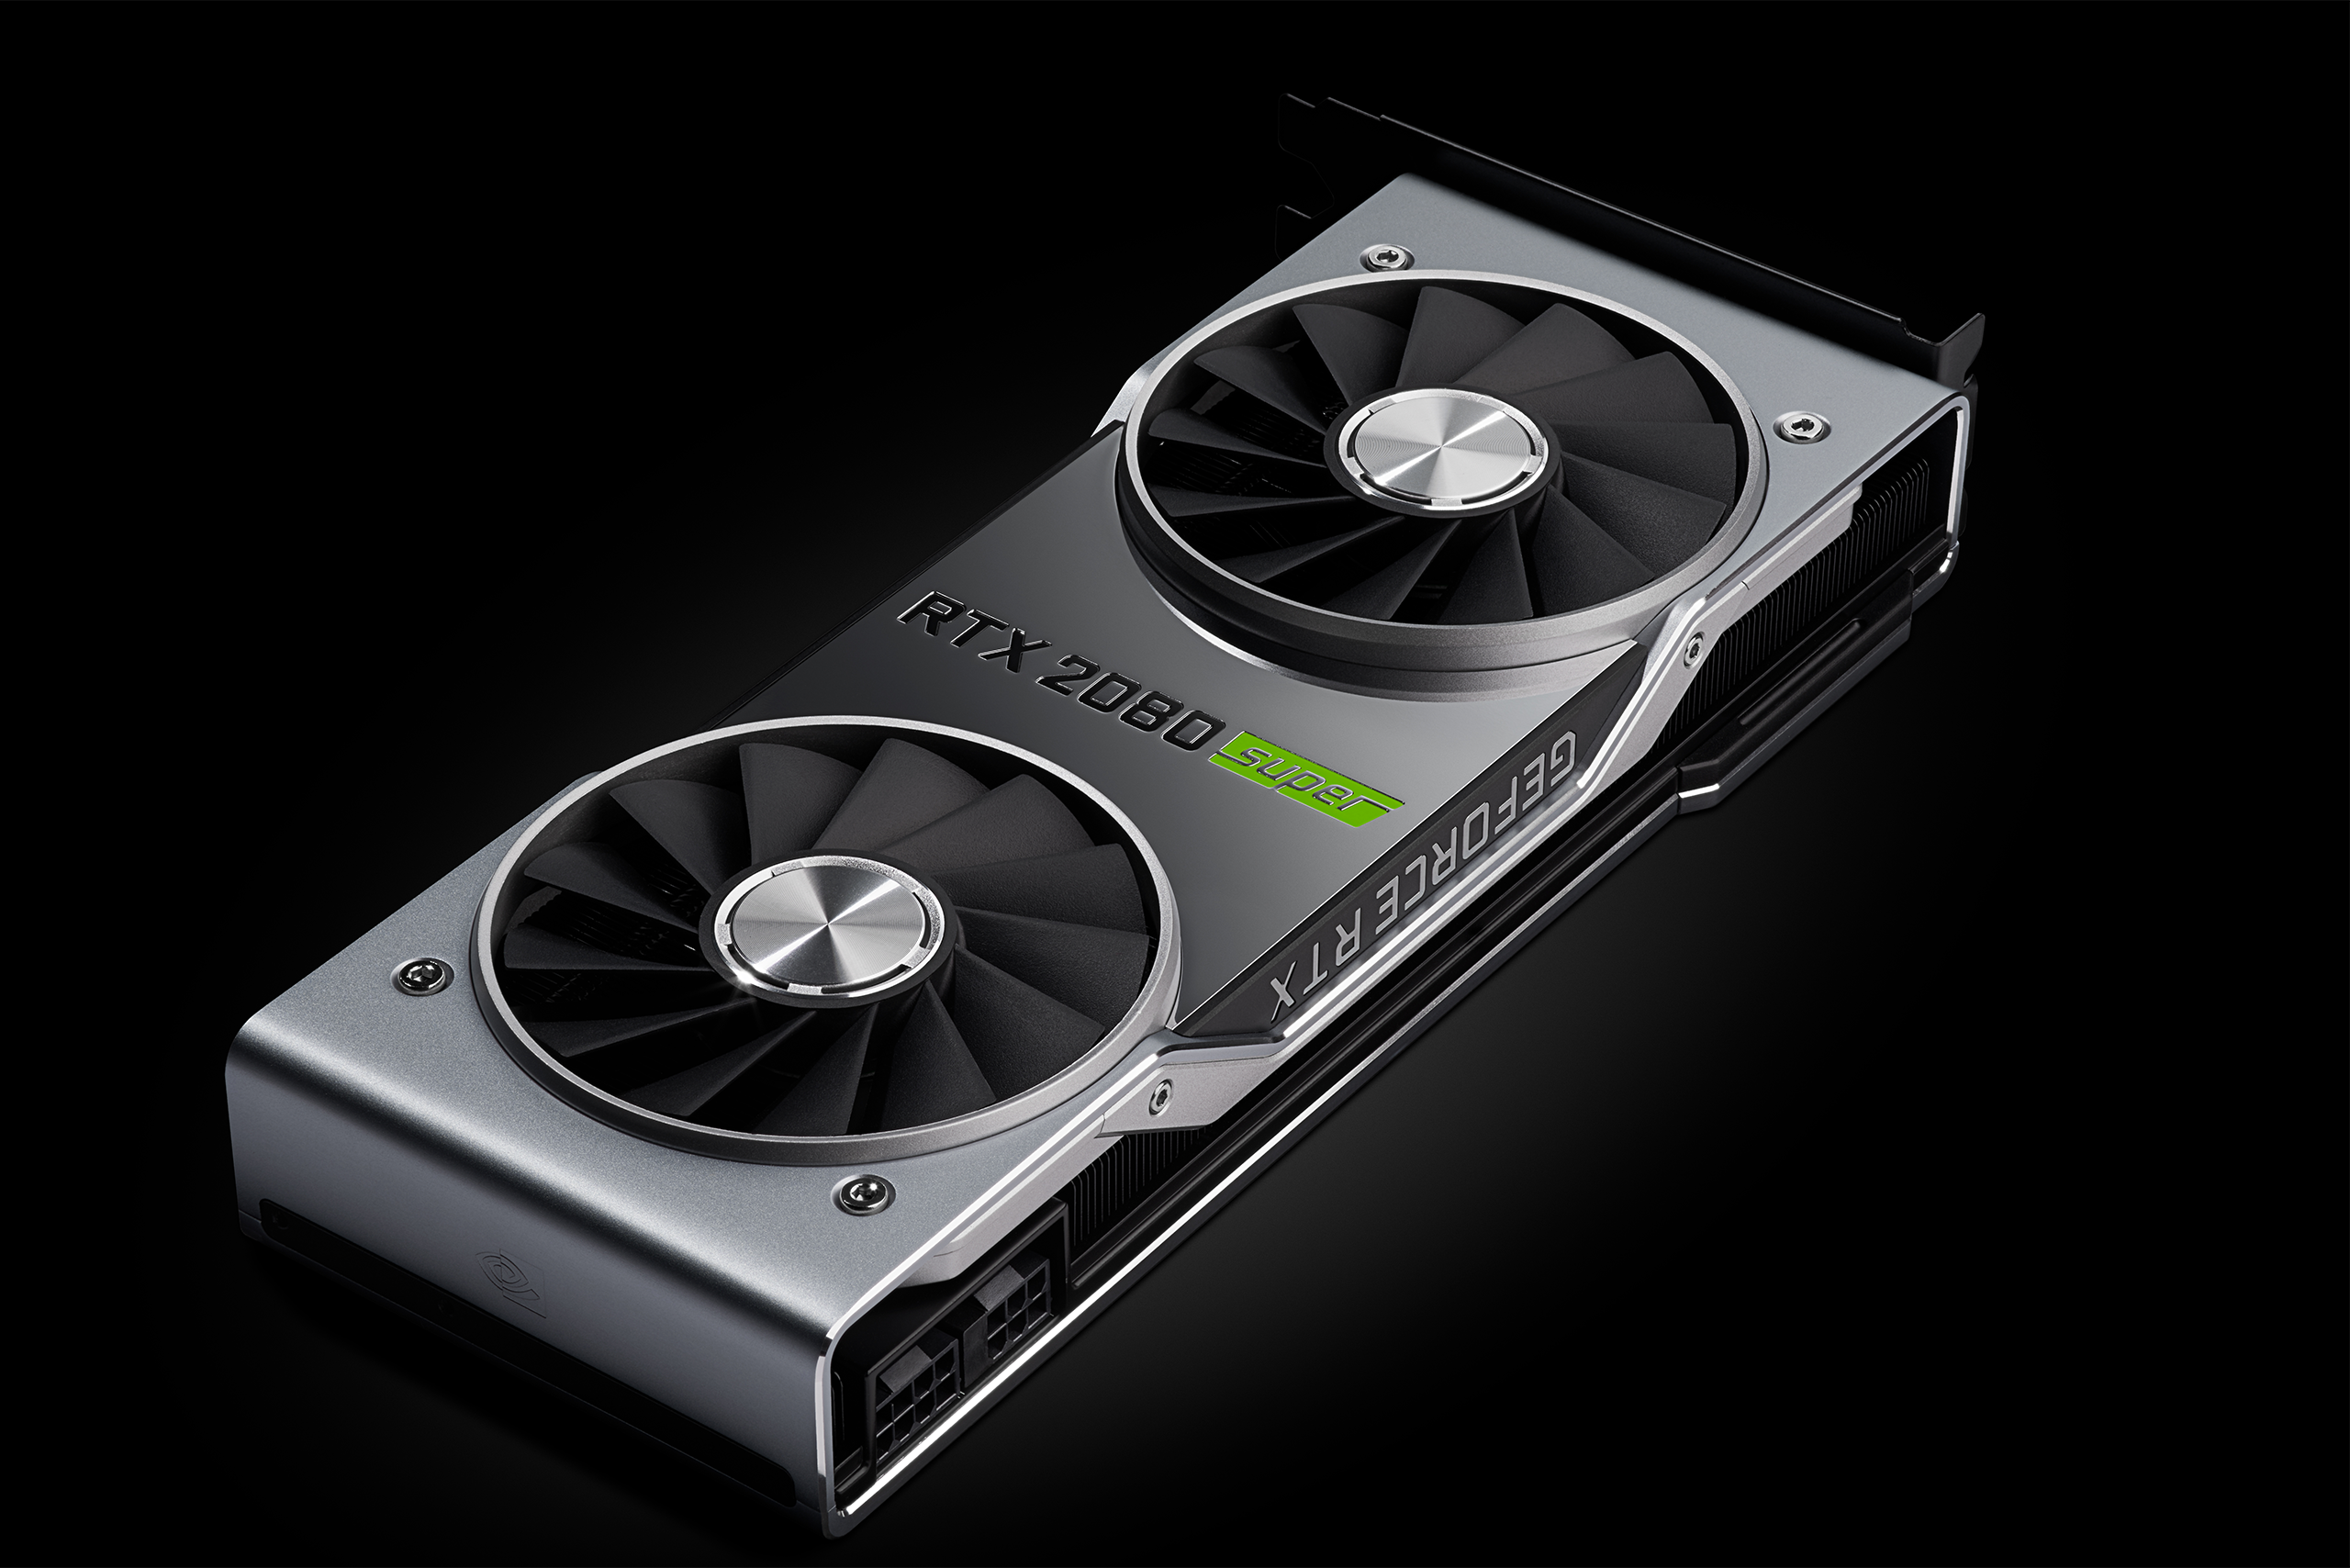 nvidia geforce now rtx upgrades to